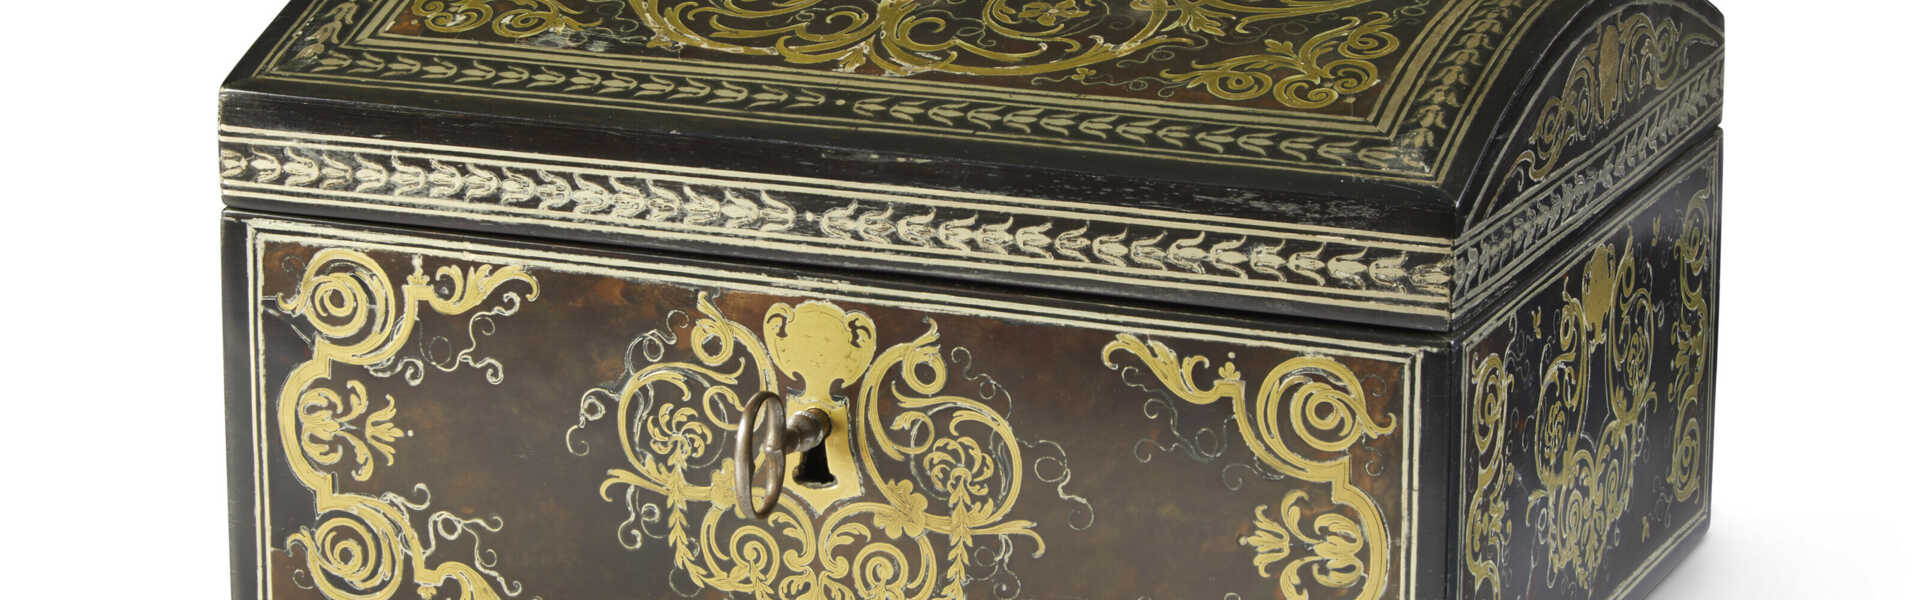 A LOUIS XIV BOULLE BRASS AND PEWTER-INLAID TORTOISESHELL CASKET